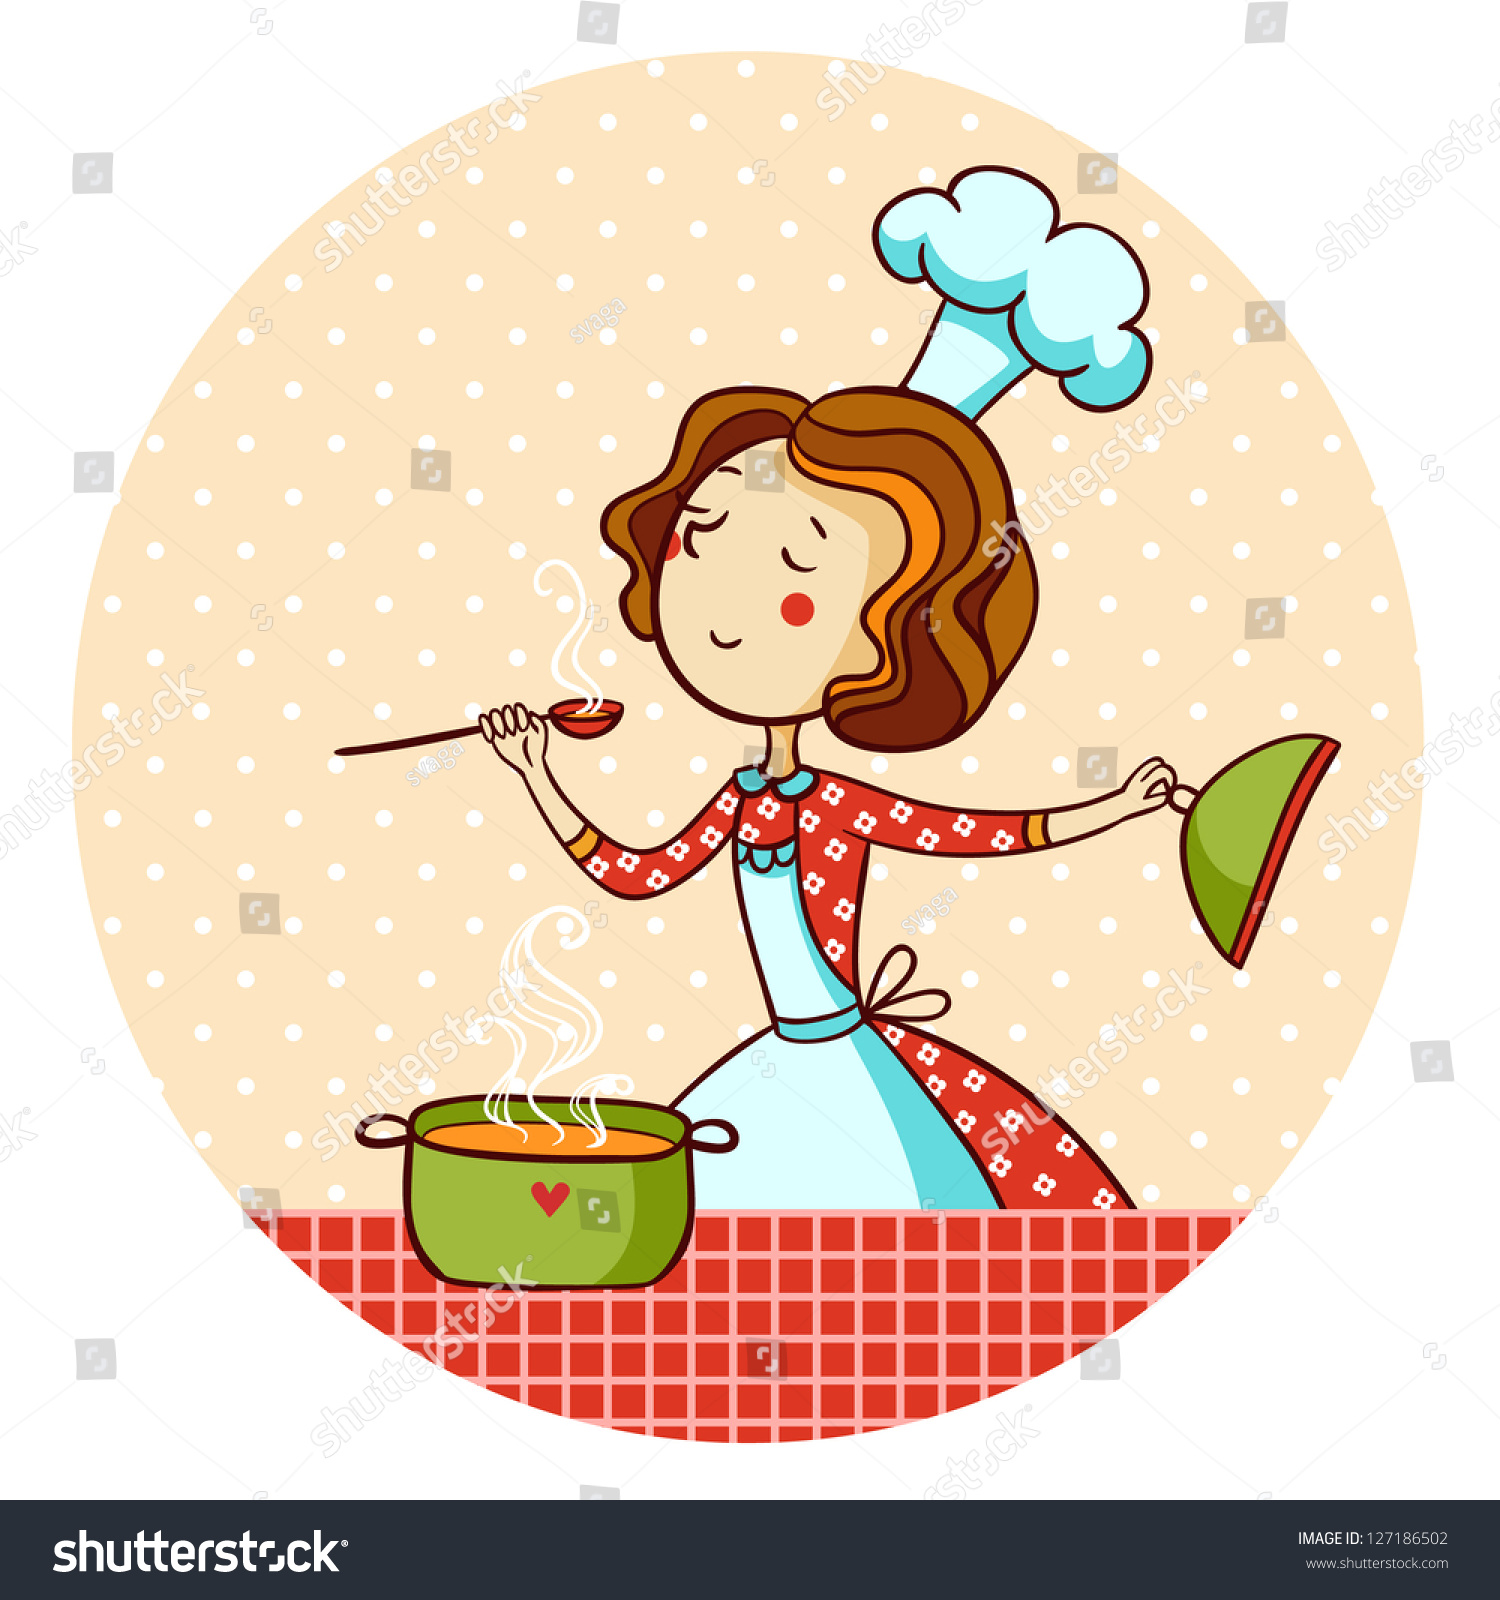 cooking dinner clipart - photo #35